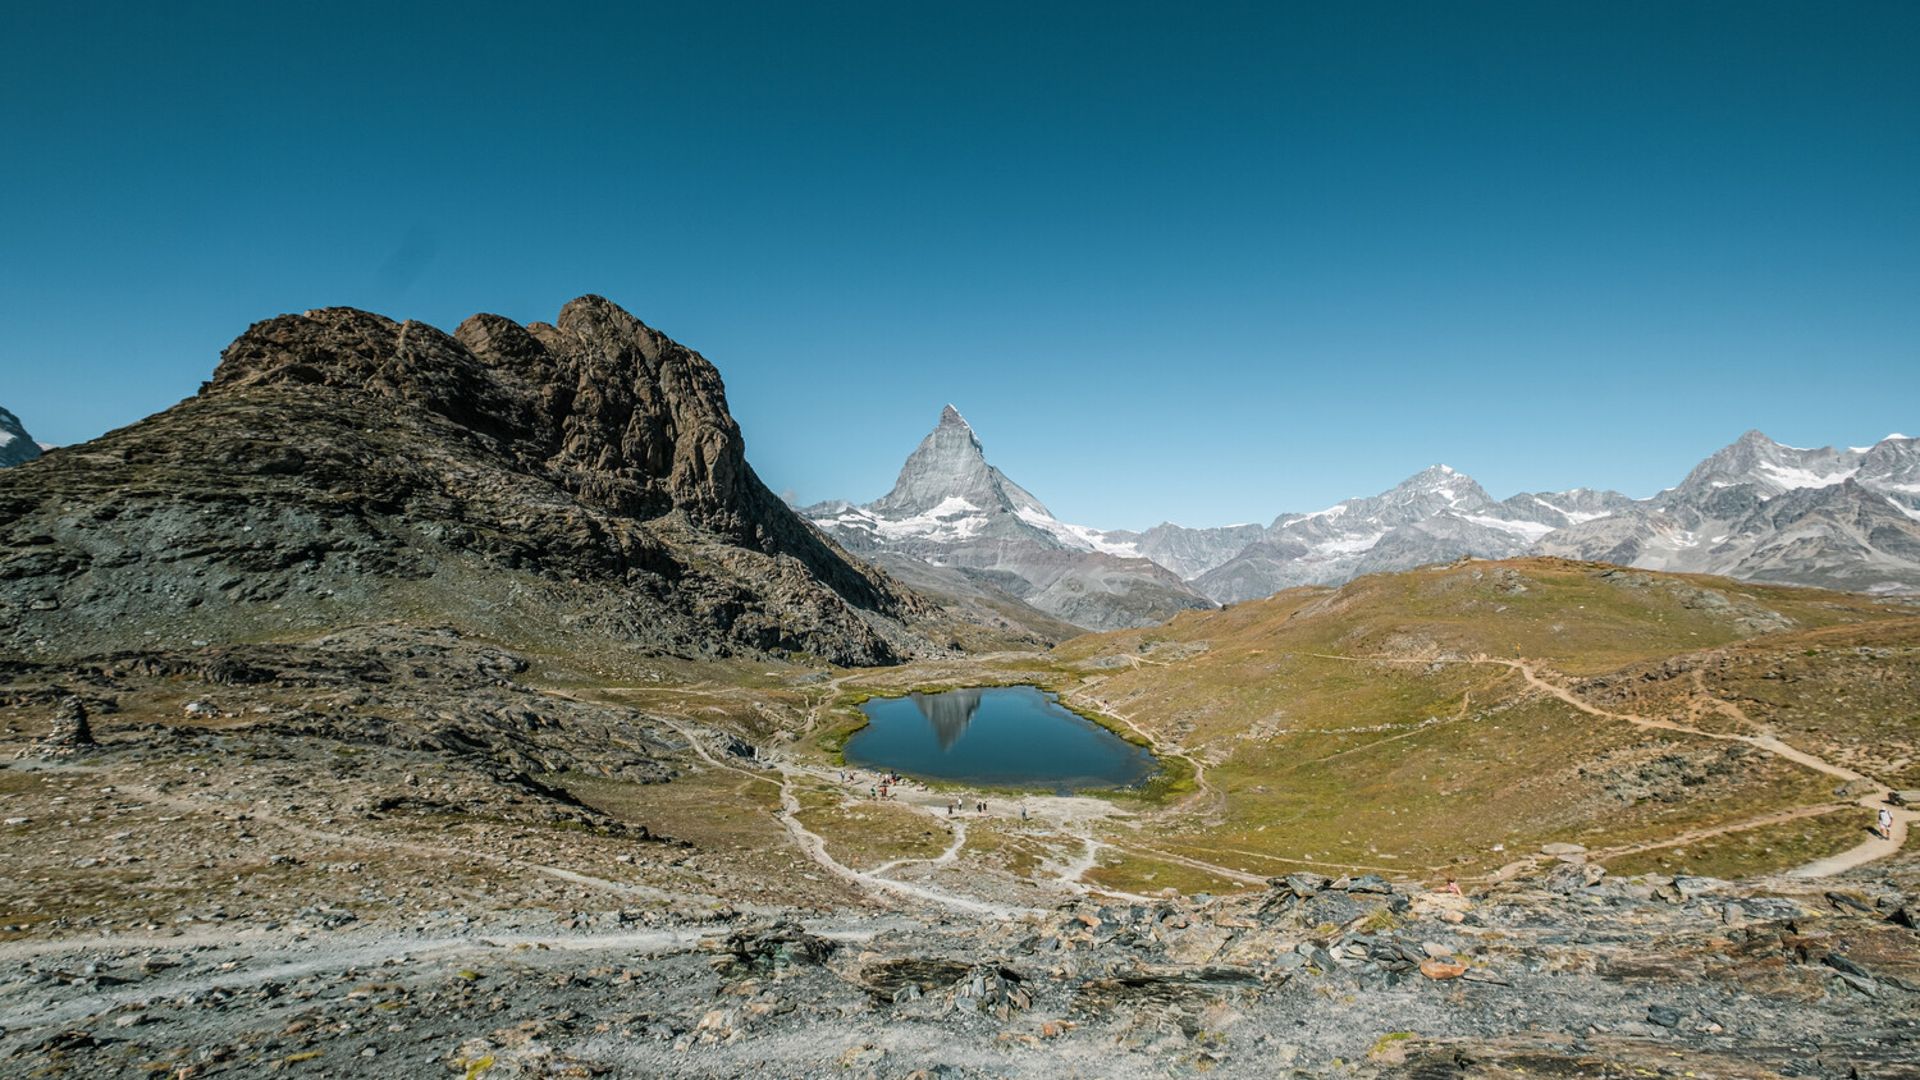 Reflection of the Matterhorn in Riffelsee Lake on the Gornergrat in summer 